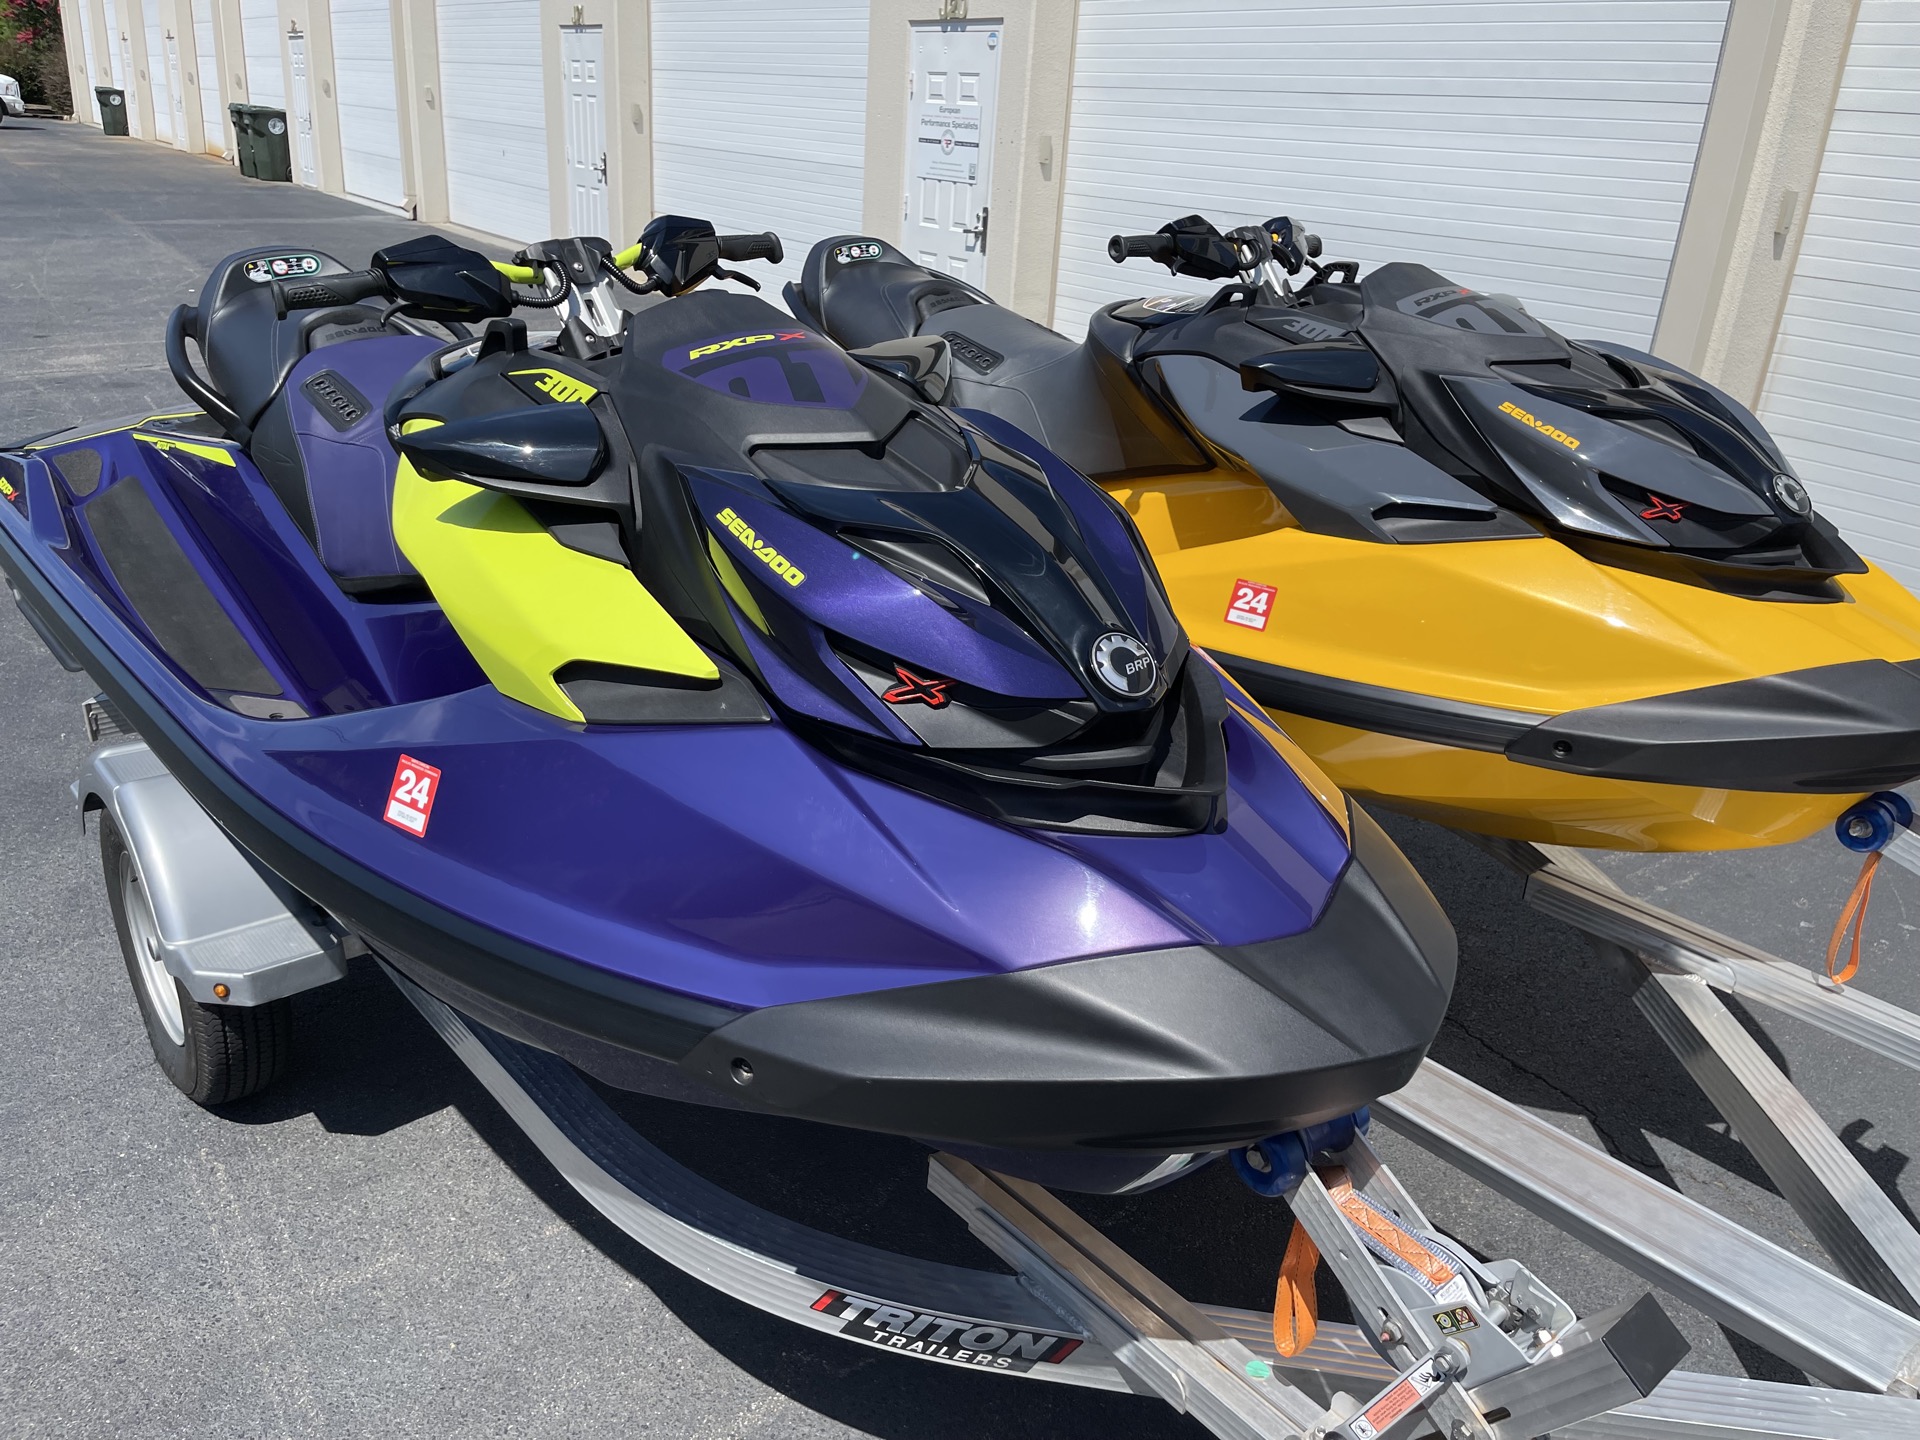 2021 SeaDoo RXP X 300 Package Funktion Automotive Performance